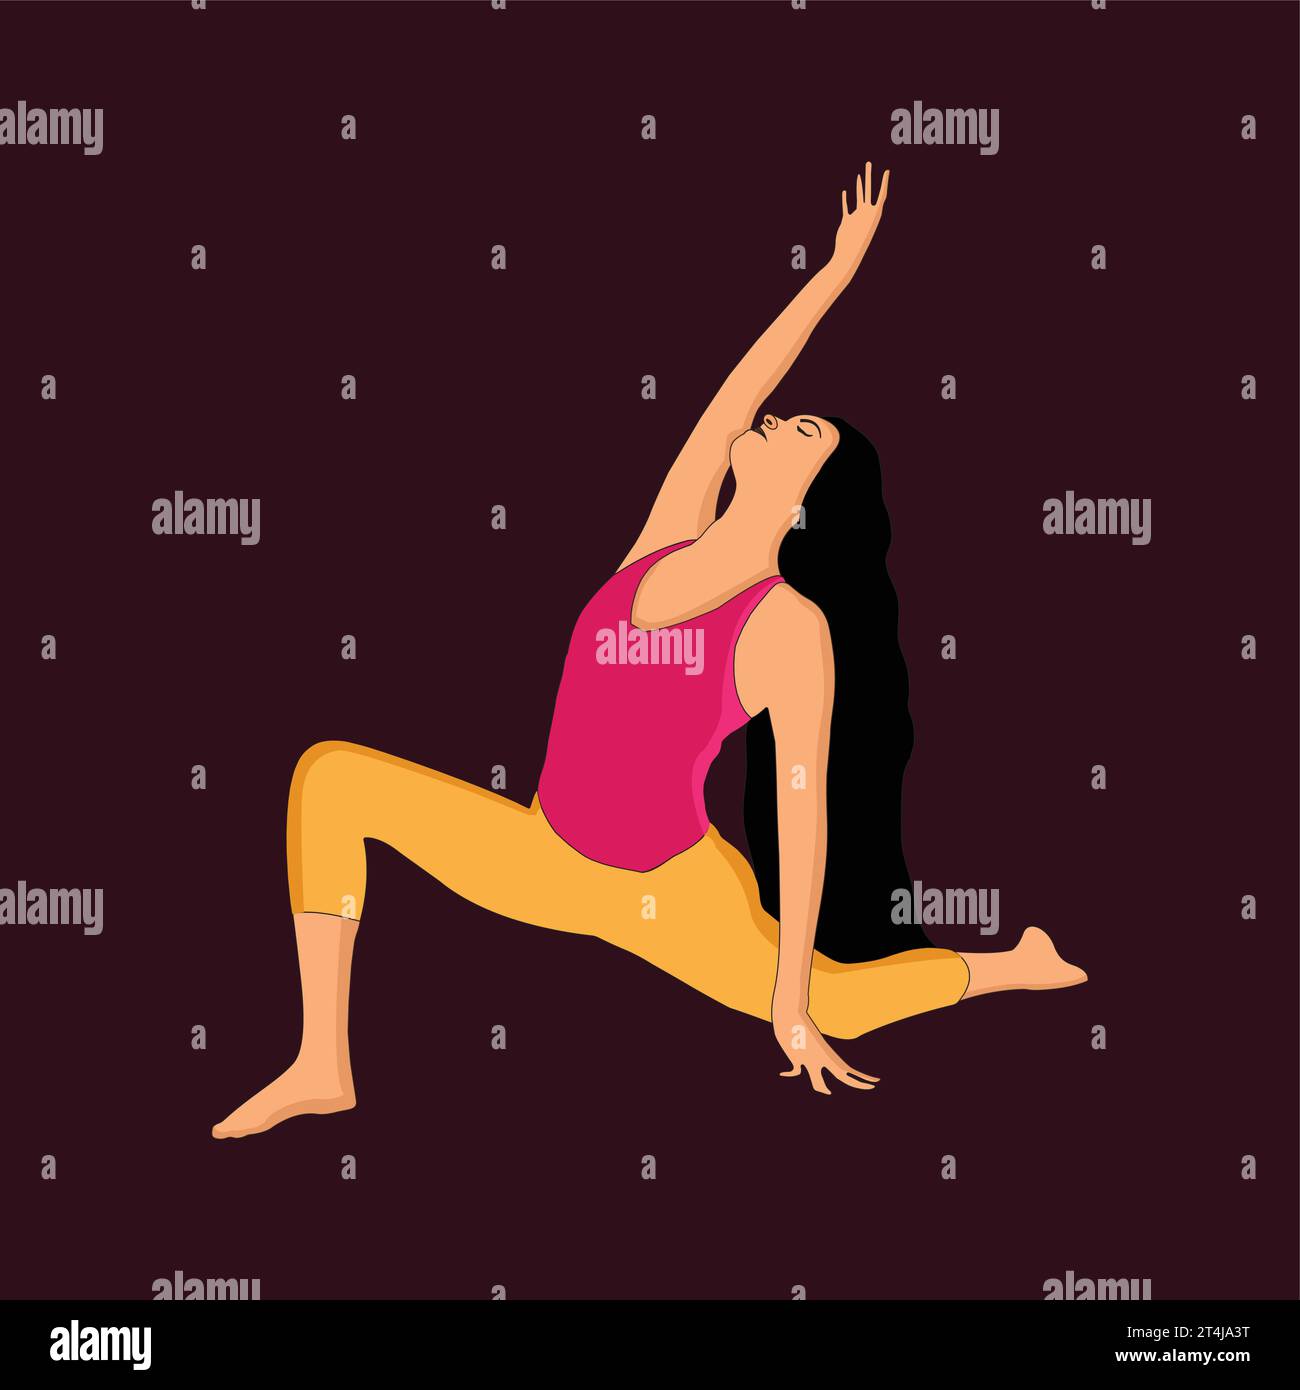 International Yoga Day: Practice Asanas Daily For A Healthy Life-  Infographic